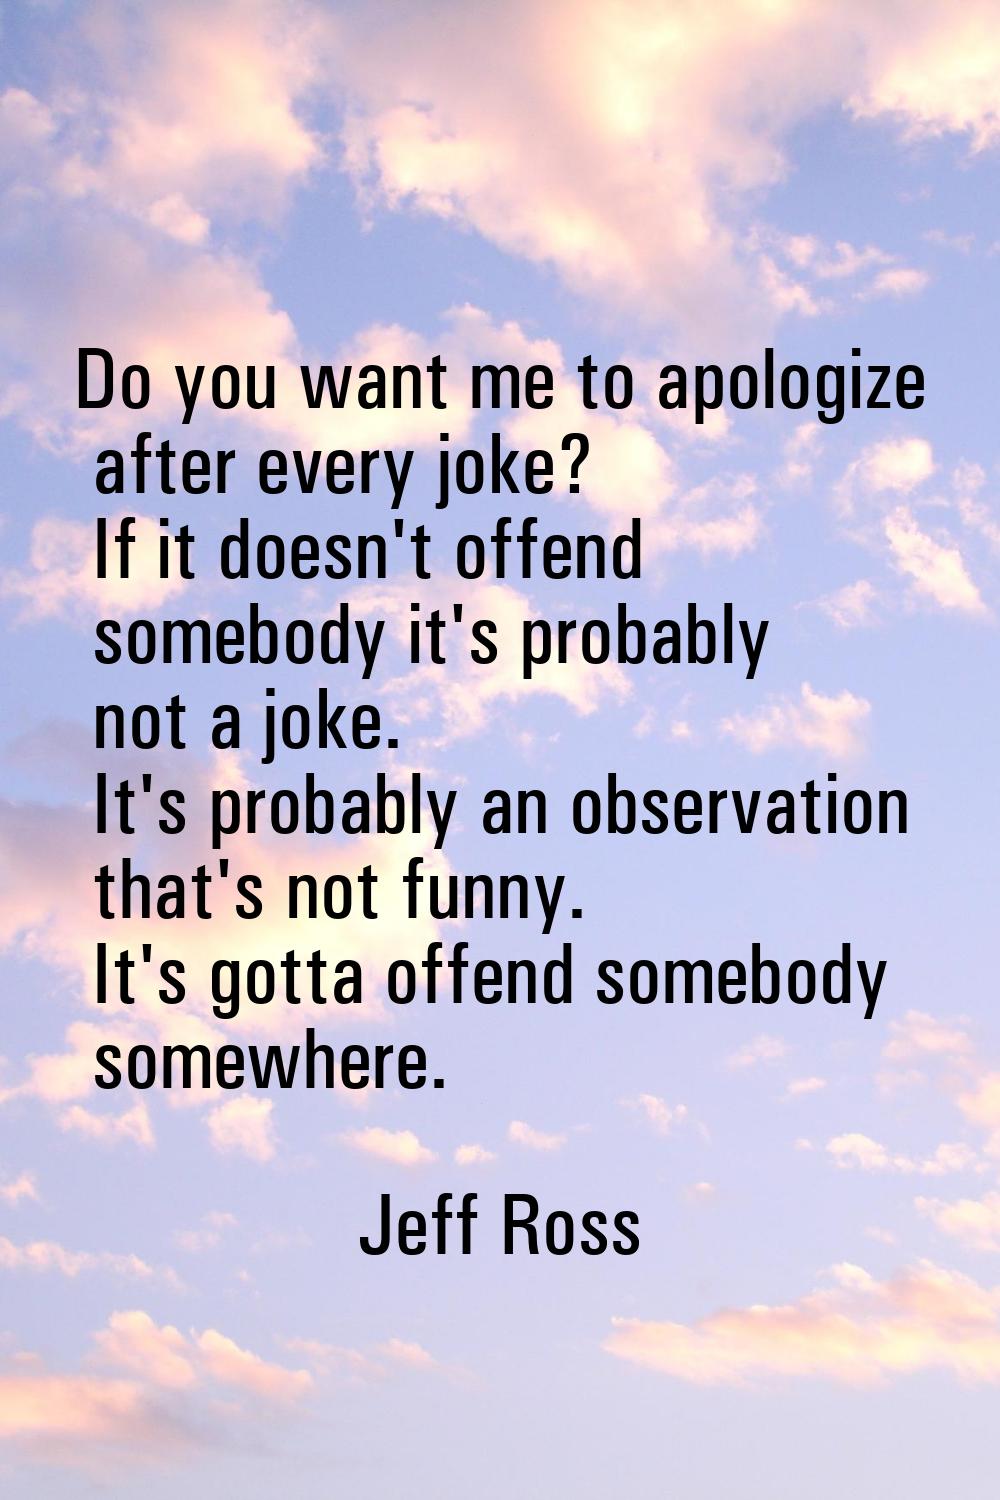 Do you want me to apologize after every joke? If it doesn't offend somebody it's probably not a jok